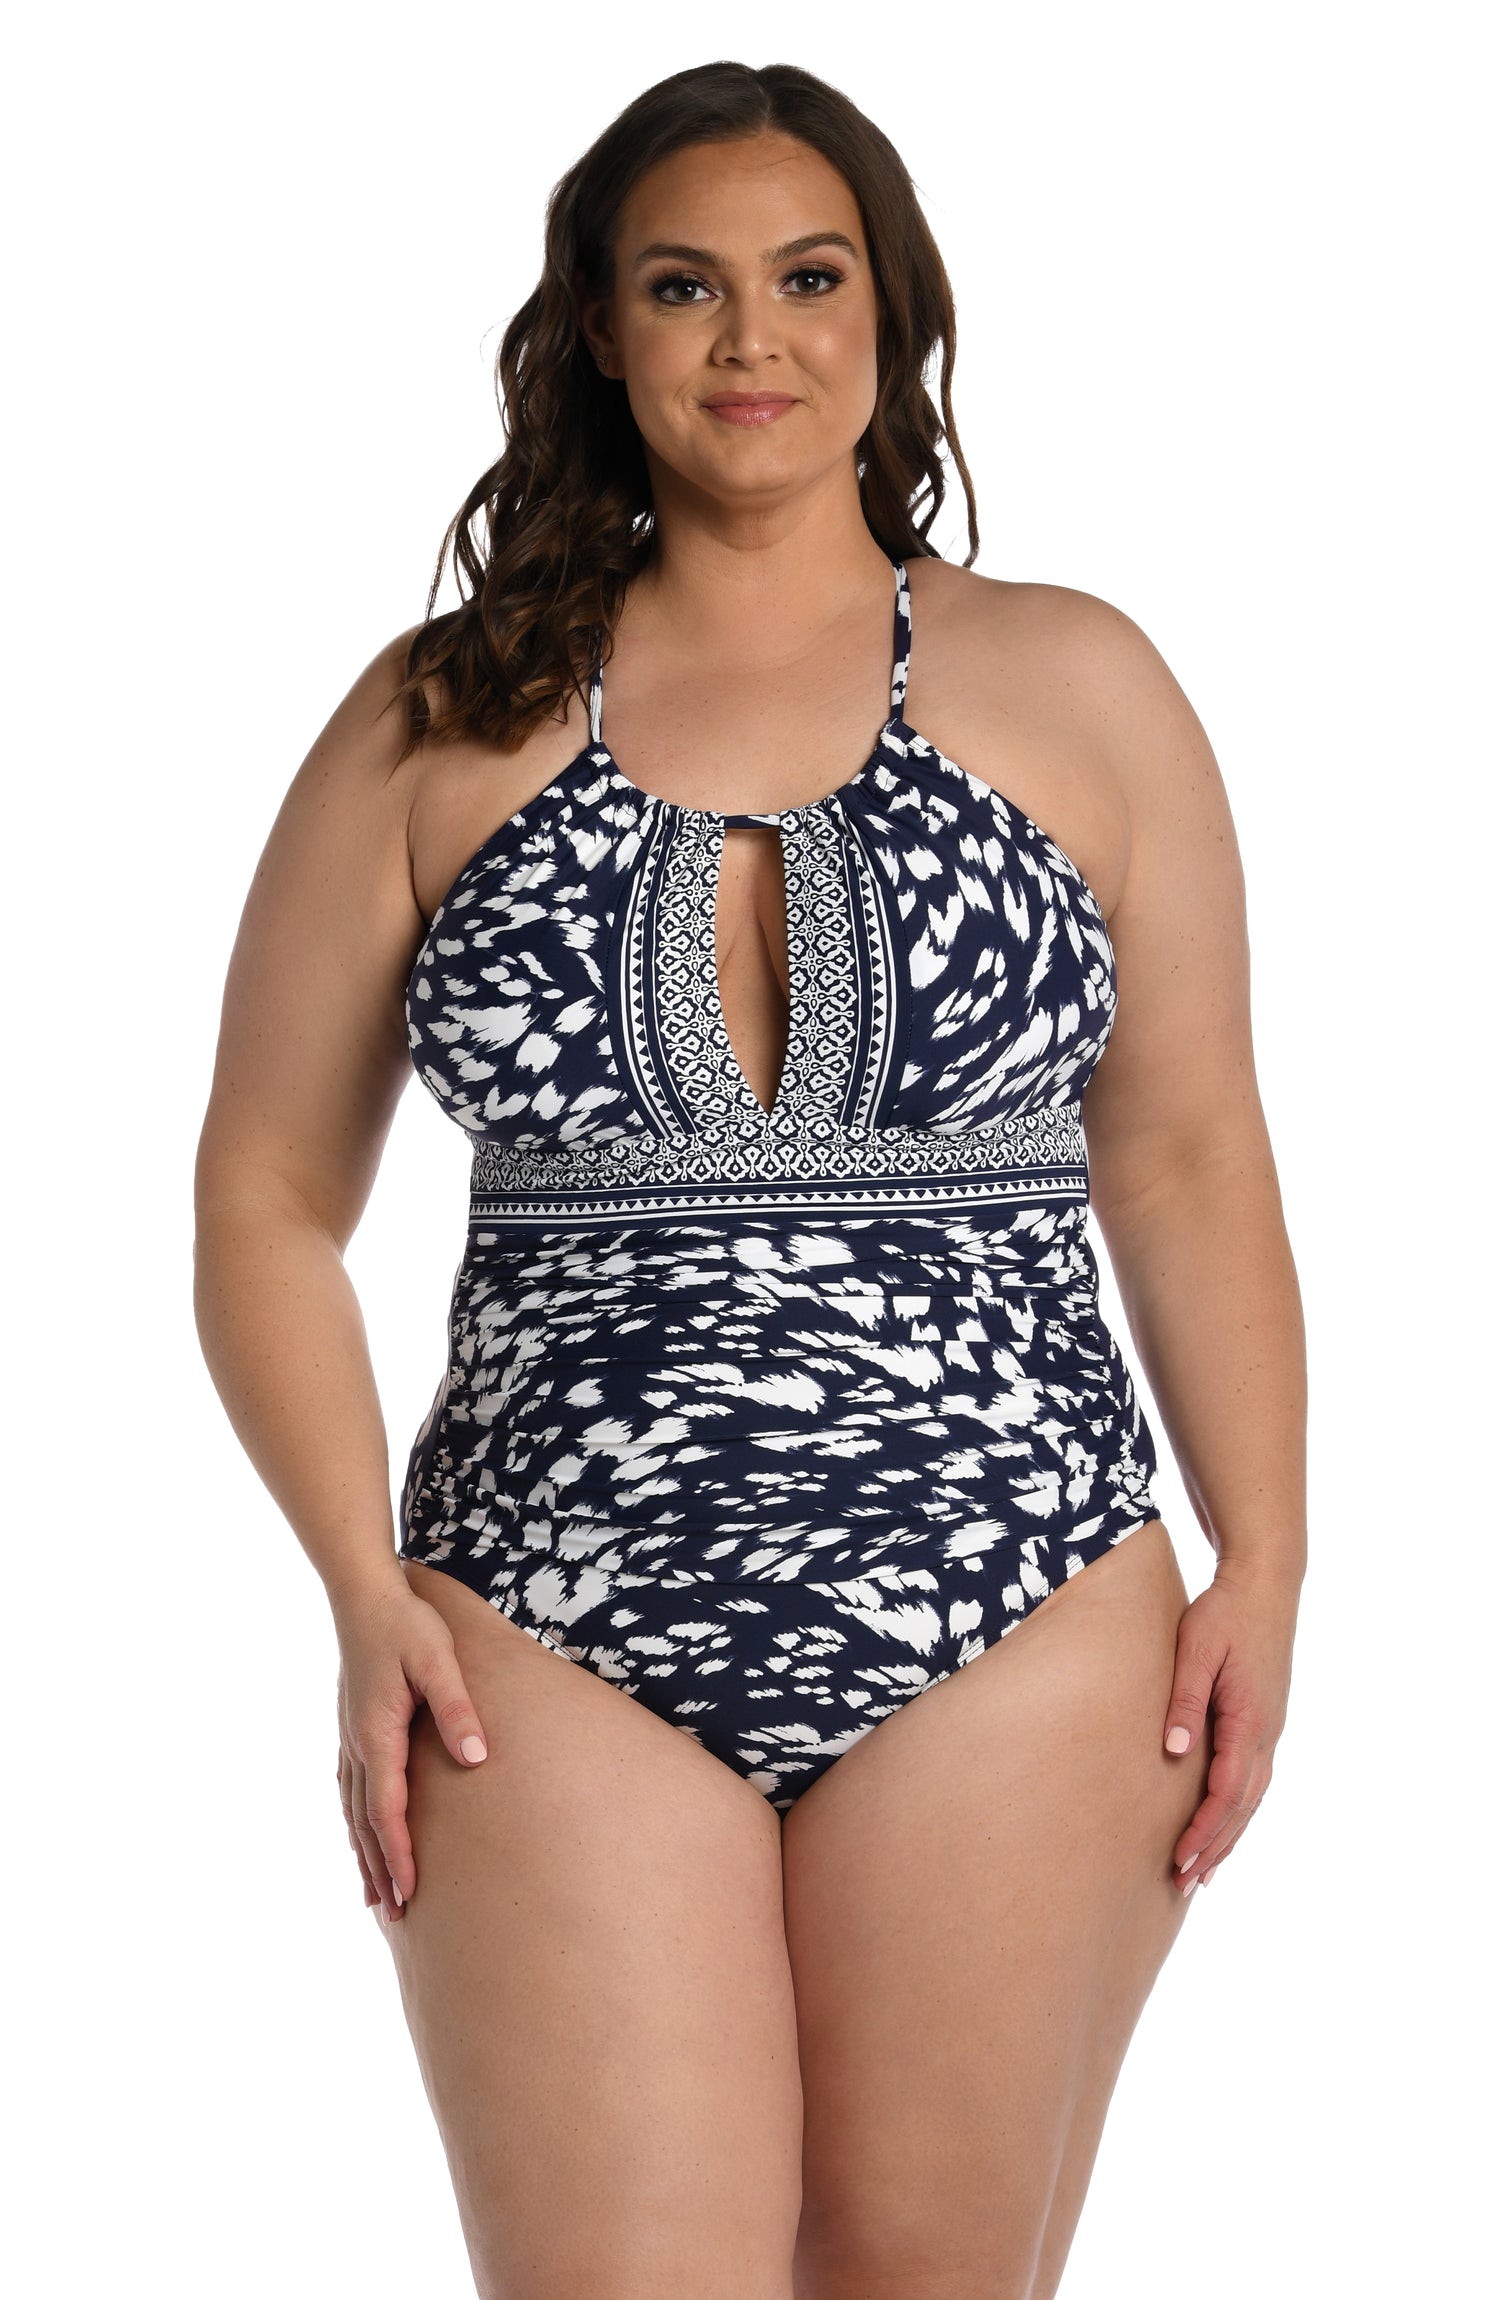 Model is wearing a indigo blue colored print with pops of white on this high neck keyhole one piece from our Changing Tides collection!